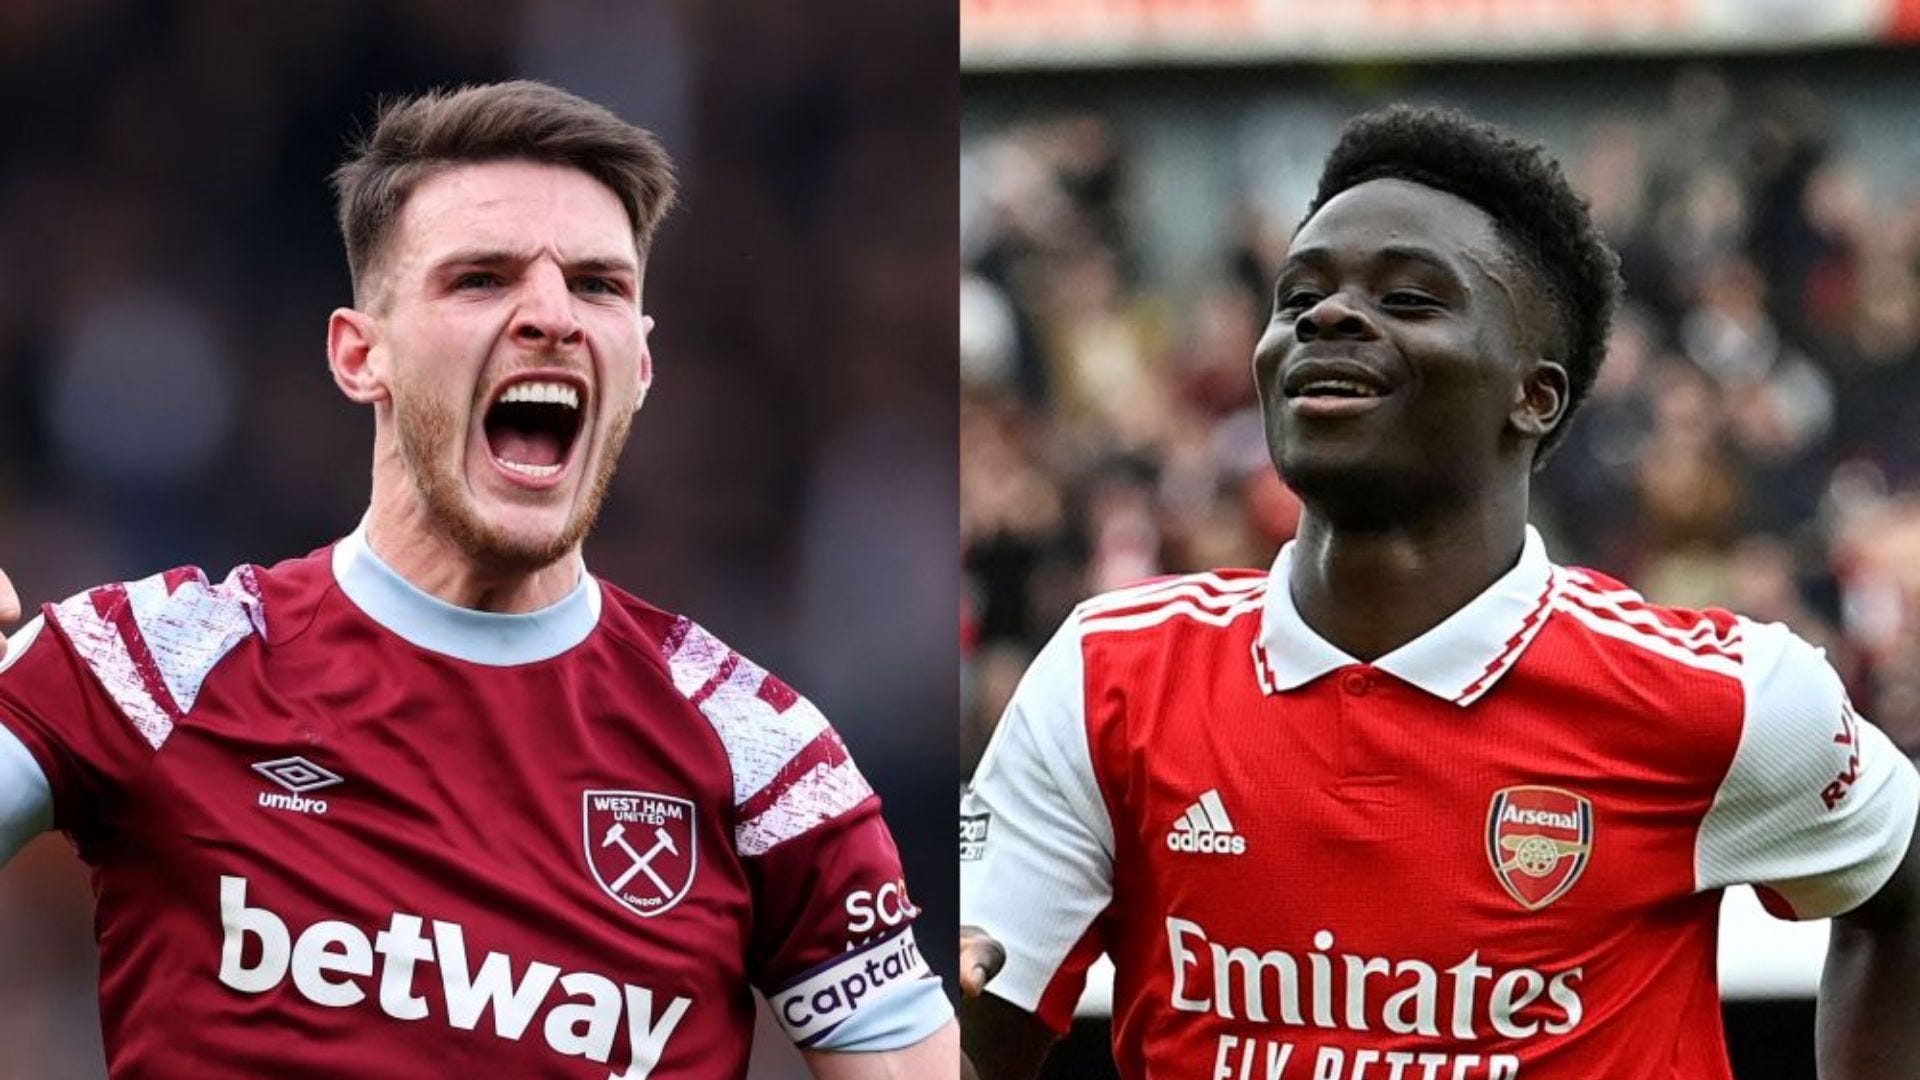 West Ham vs Arsenal Where to watch the match online, live stream, TV channels and kick-off time Goal US